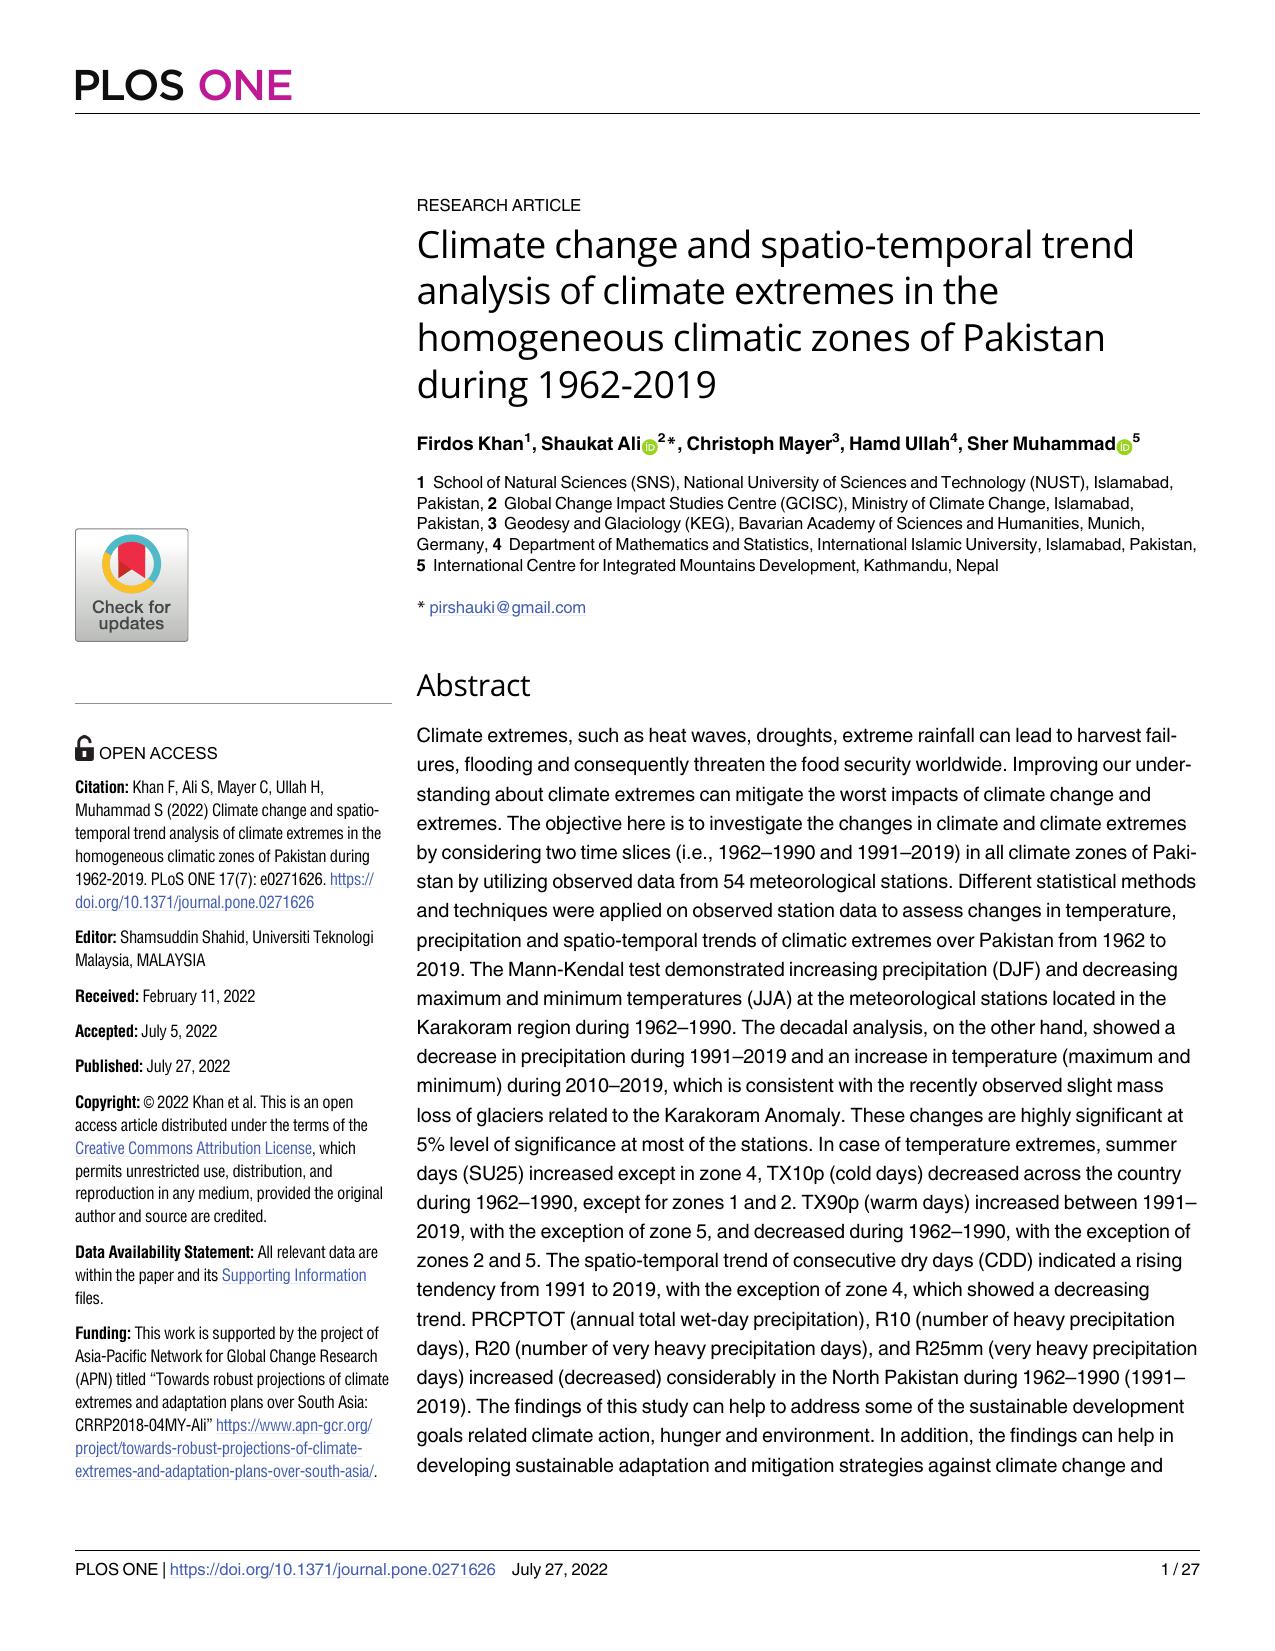 Climate change and spatio-temporal trend analysis of climate extremes in the homogeneous climatic zones of Pakistan during 1962-2019